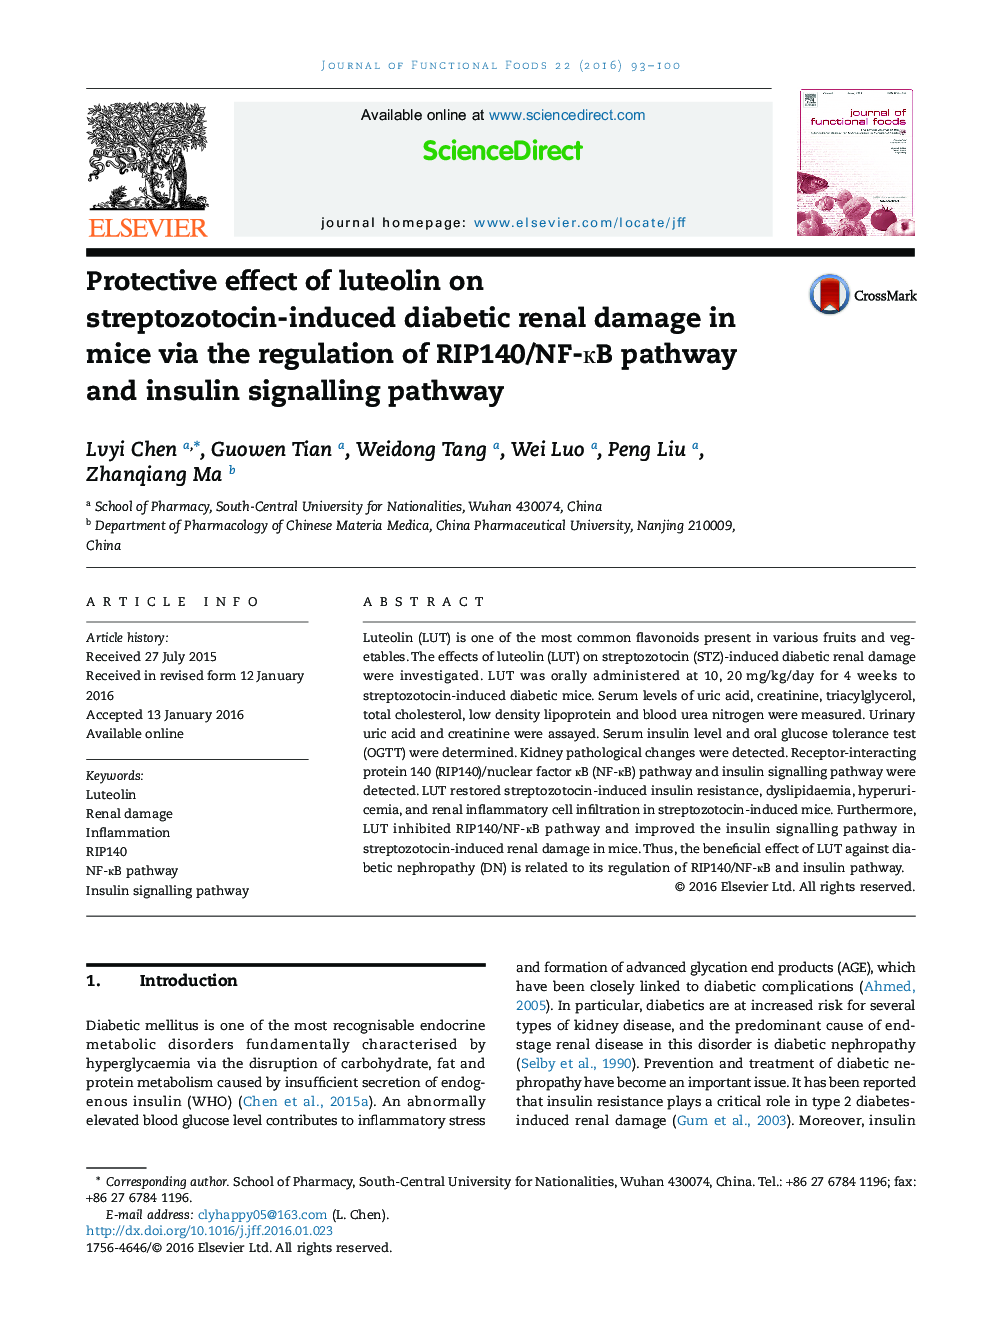 Protective effect of luteolin on streptozotocin-induced diabetic renal damage in mice via the regulation of RIP140/NF-ÐºB pathway and insulin signalling pathway